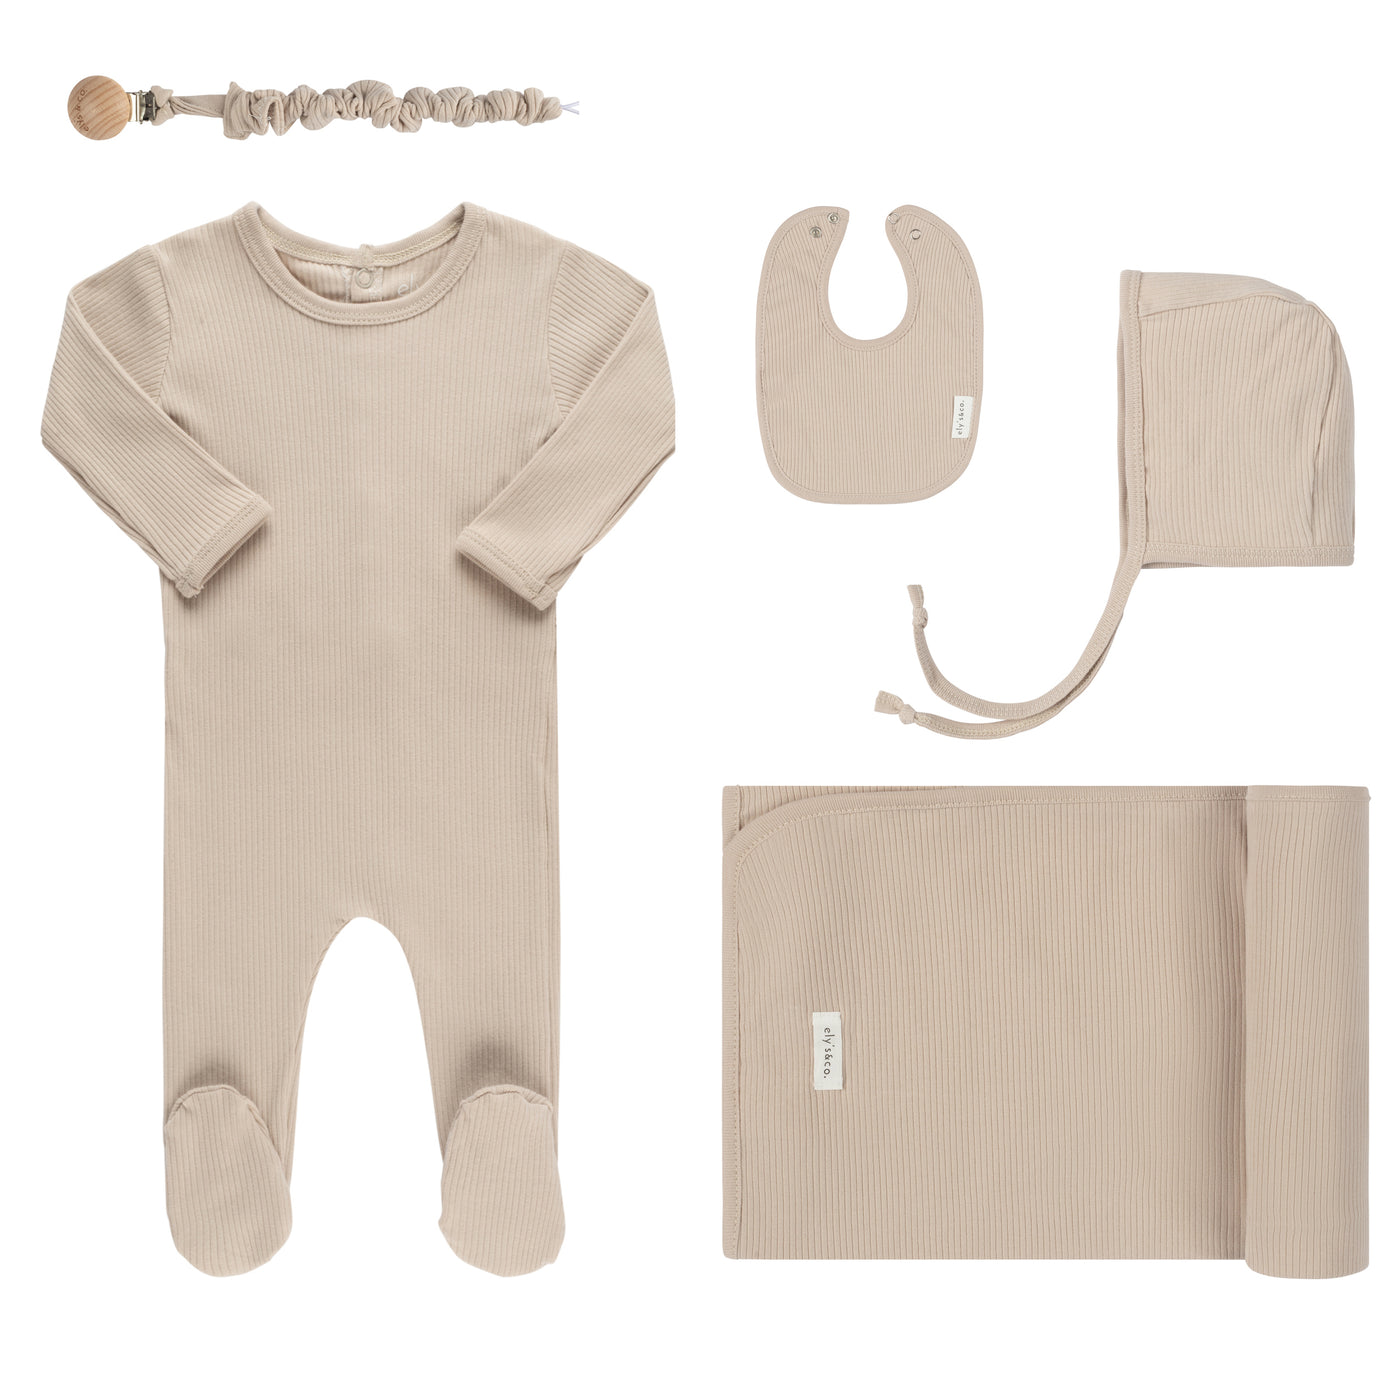 Ely's & Co. Ribbed Solid Collection Tan Five Piece Set